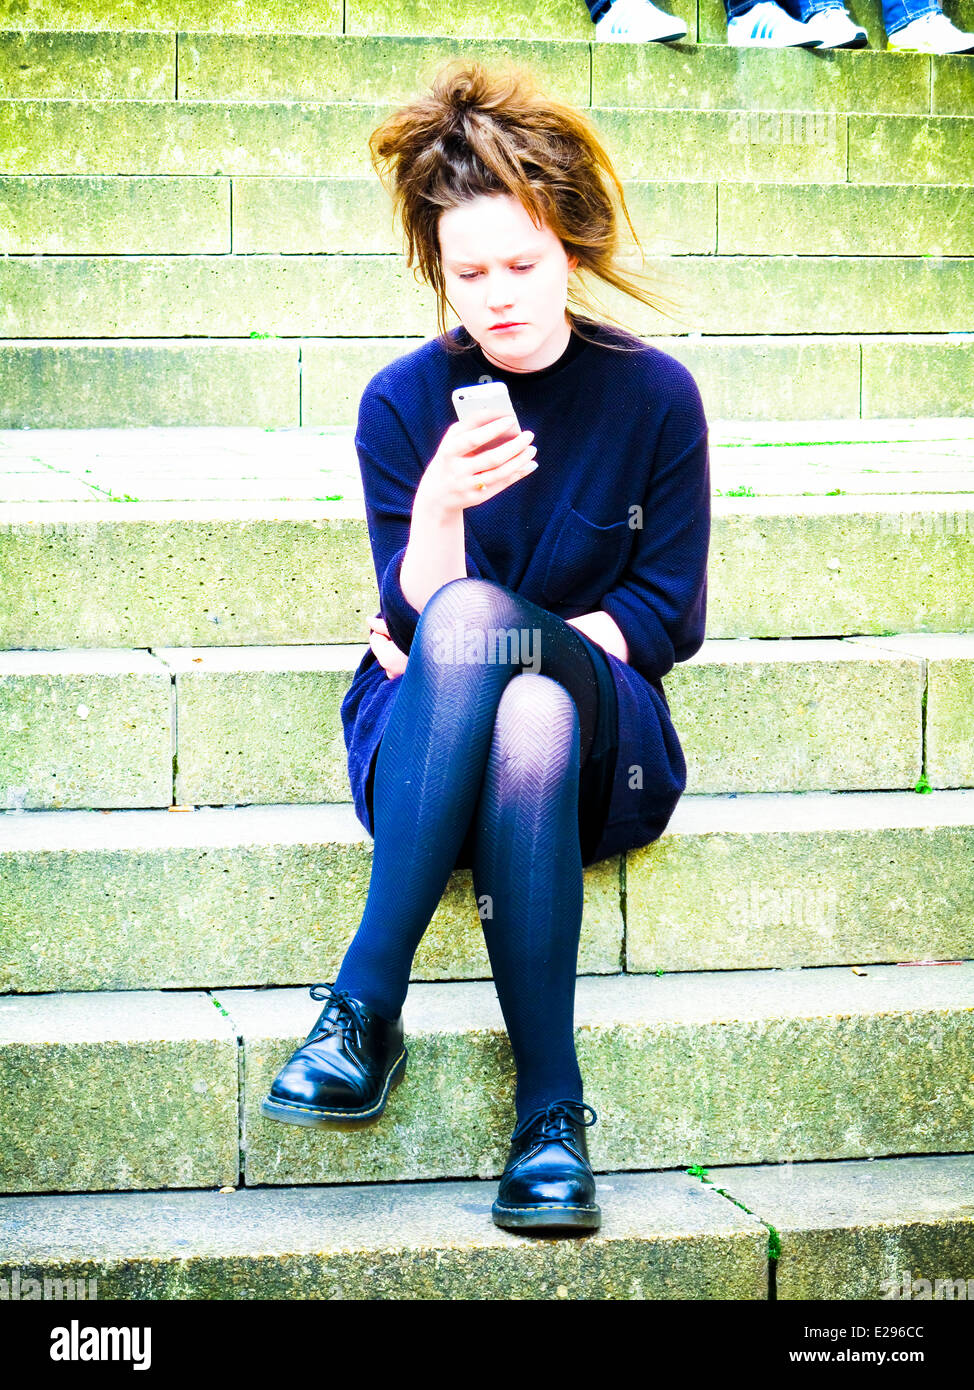 Young girl looking at phone sitting on steps Stock Photo